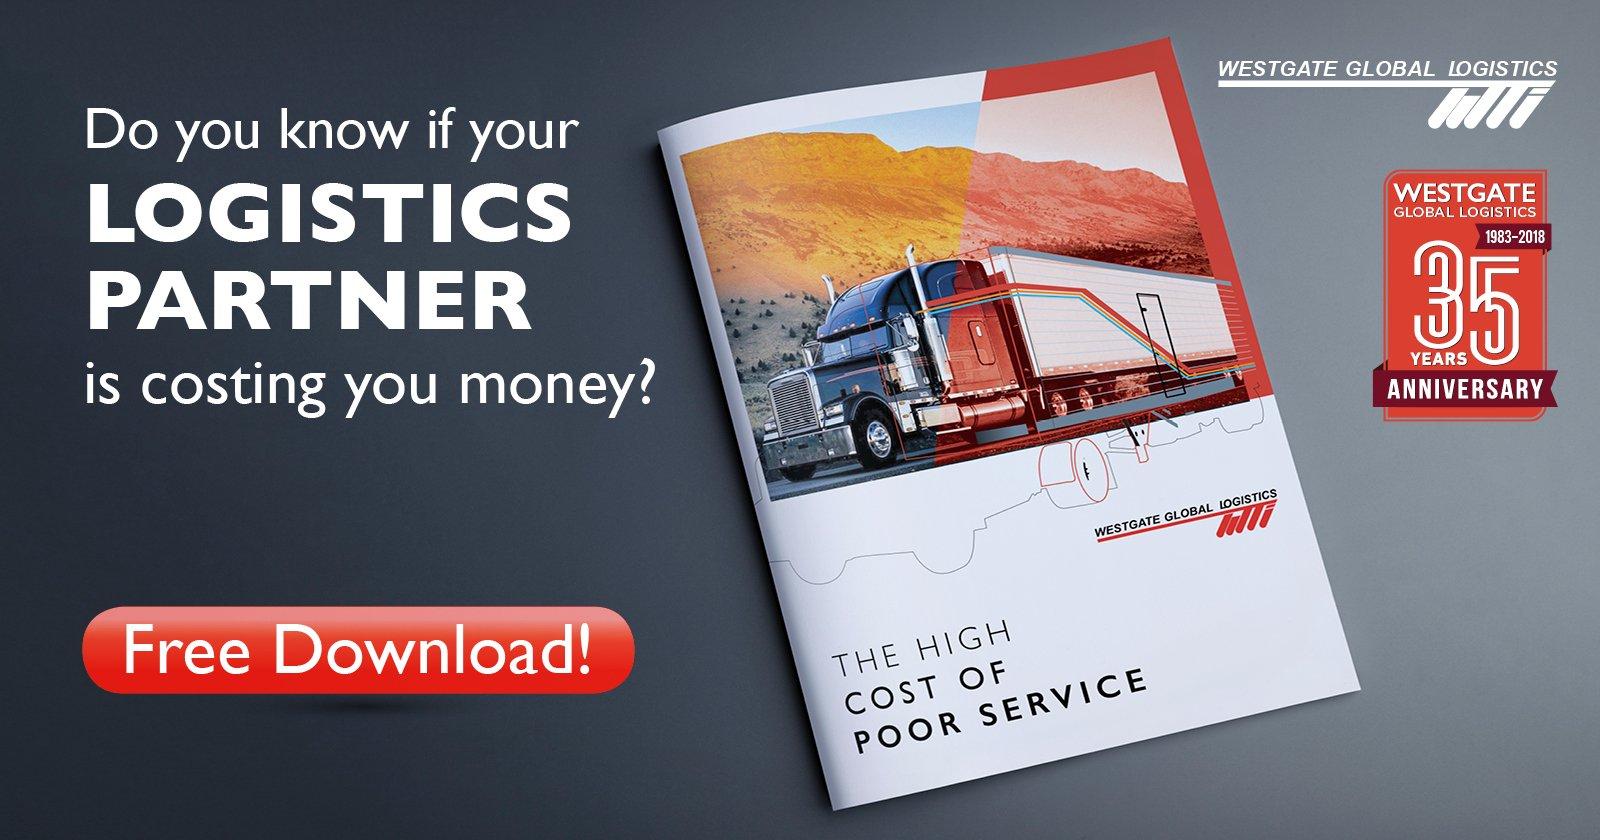 Product The High Cost of Poor Service - Westgate Global Logistics image